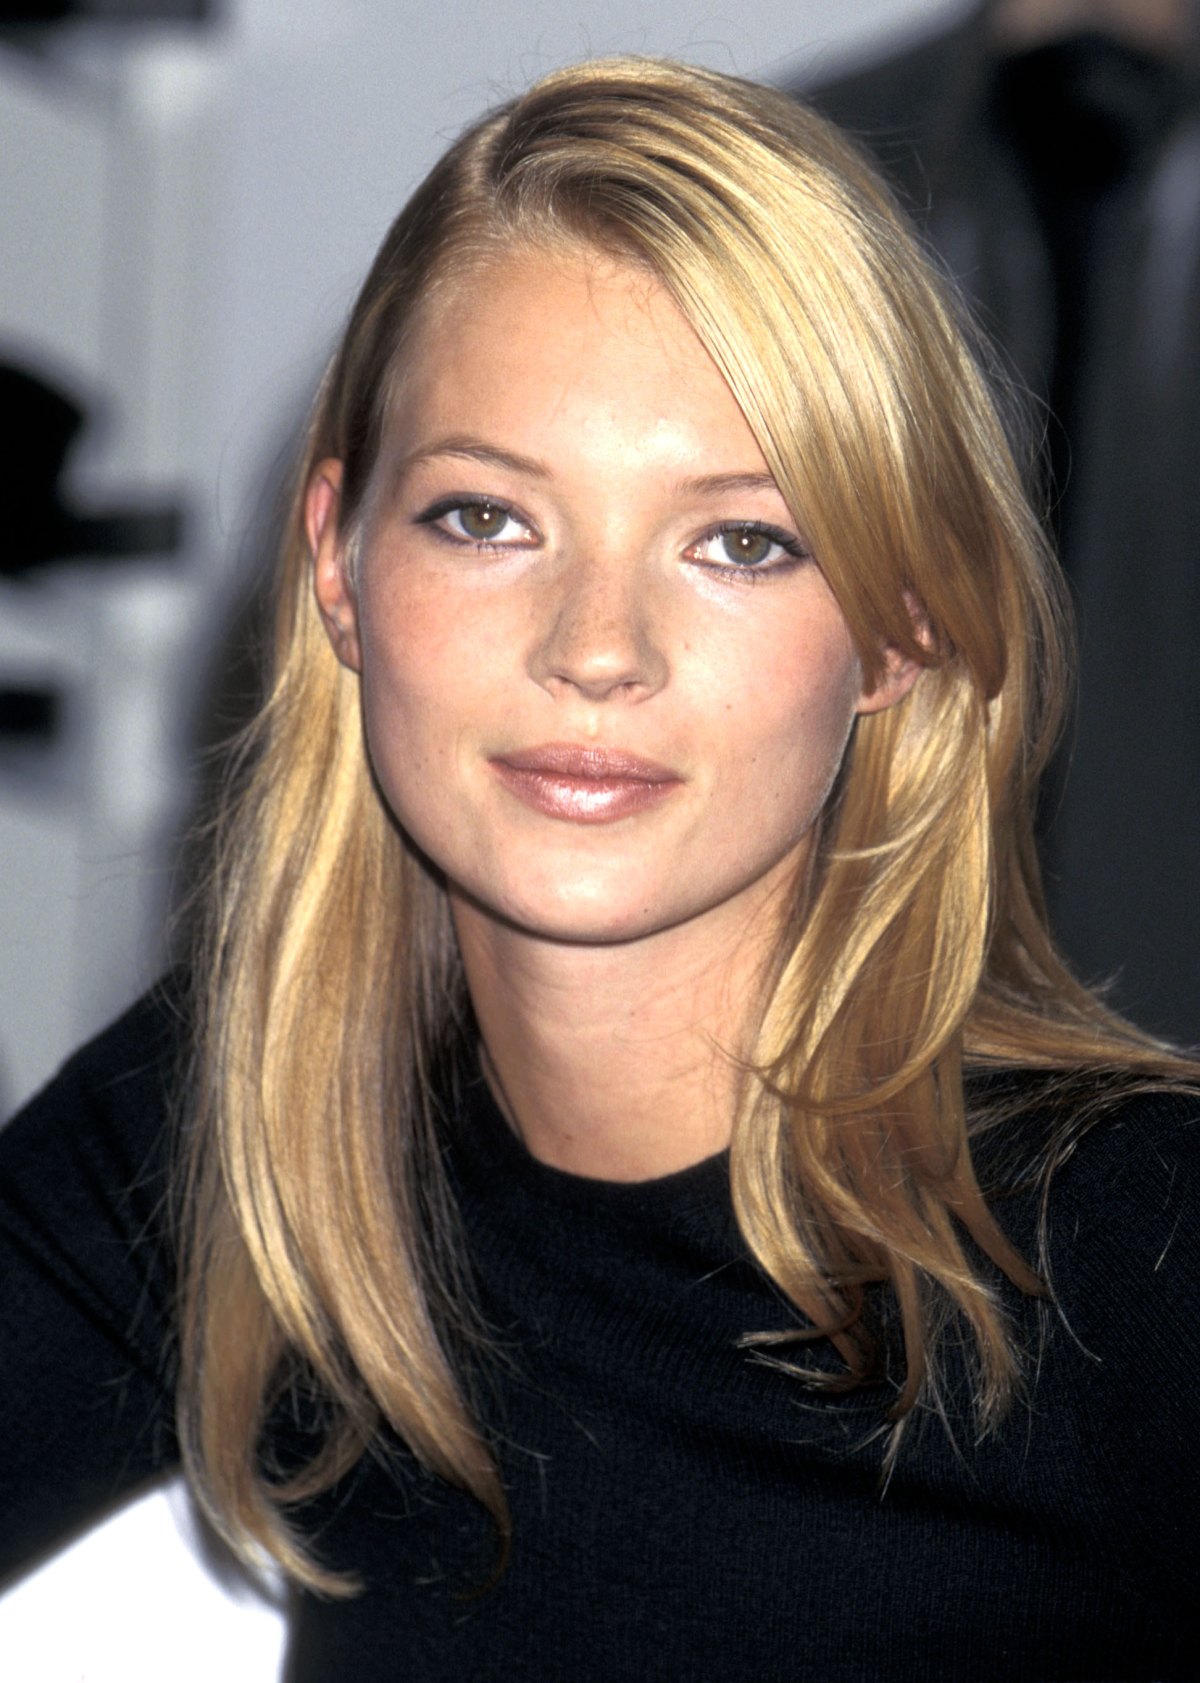 Kate Moss's Style Evolution Her AllTime Best Fashion Looks